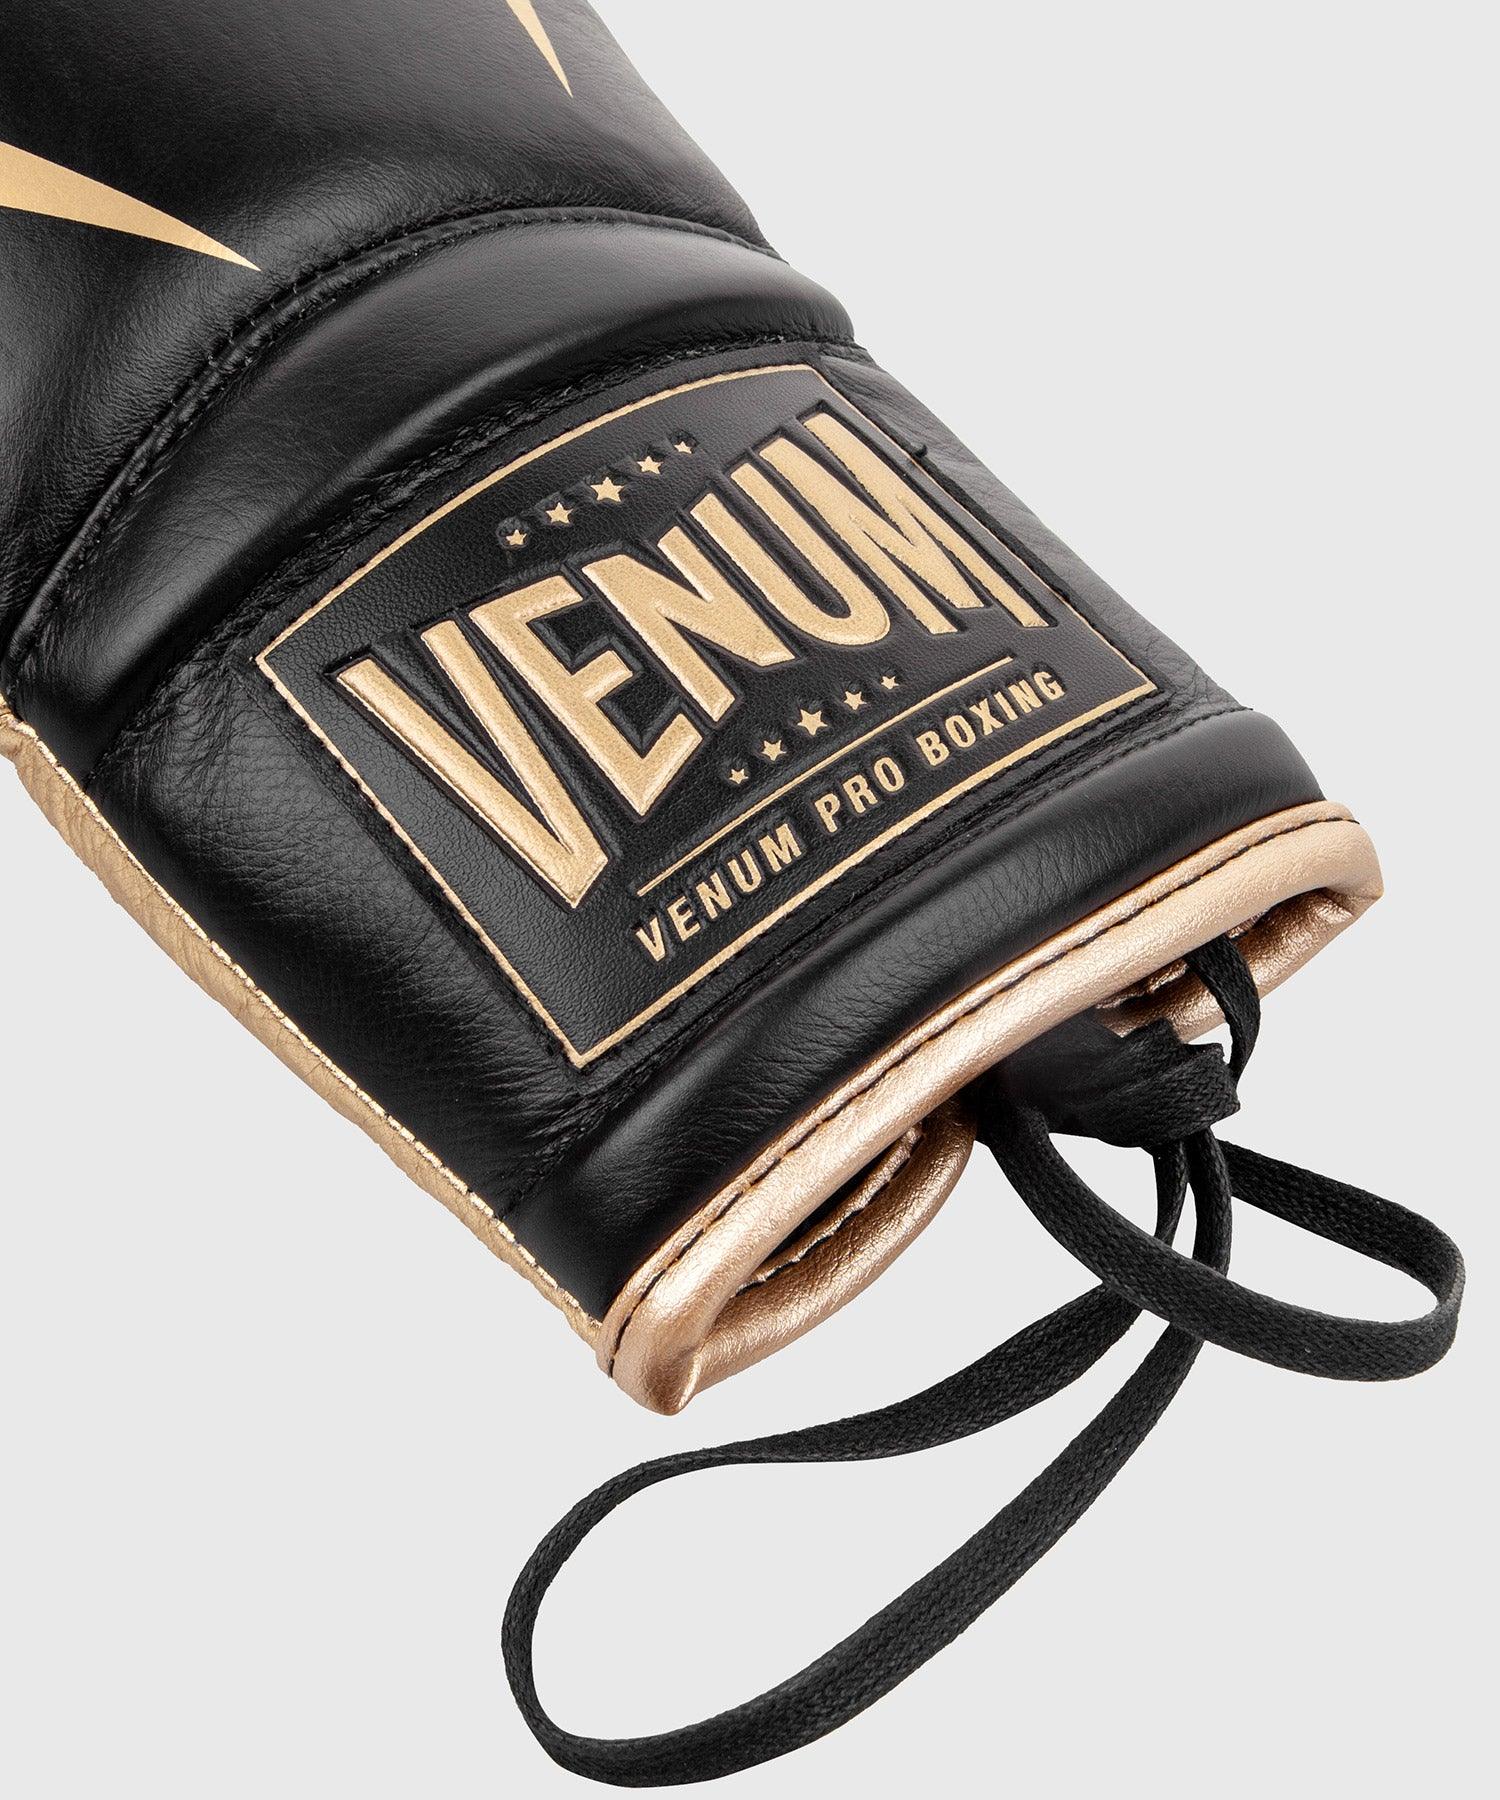 Venum Giant 2.0 Pro Boxing Gloves - With Laces - Black/Gold Picture 8